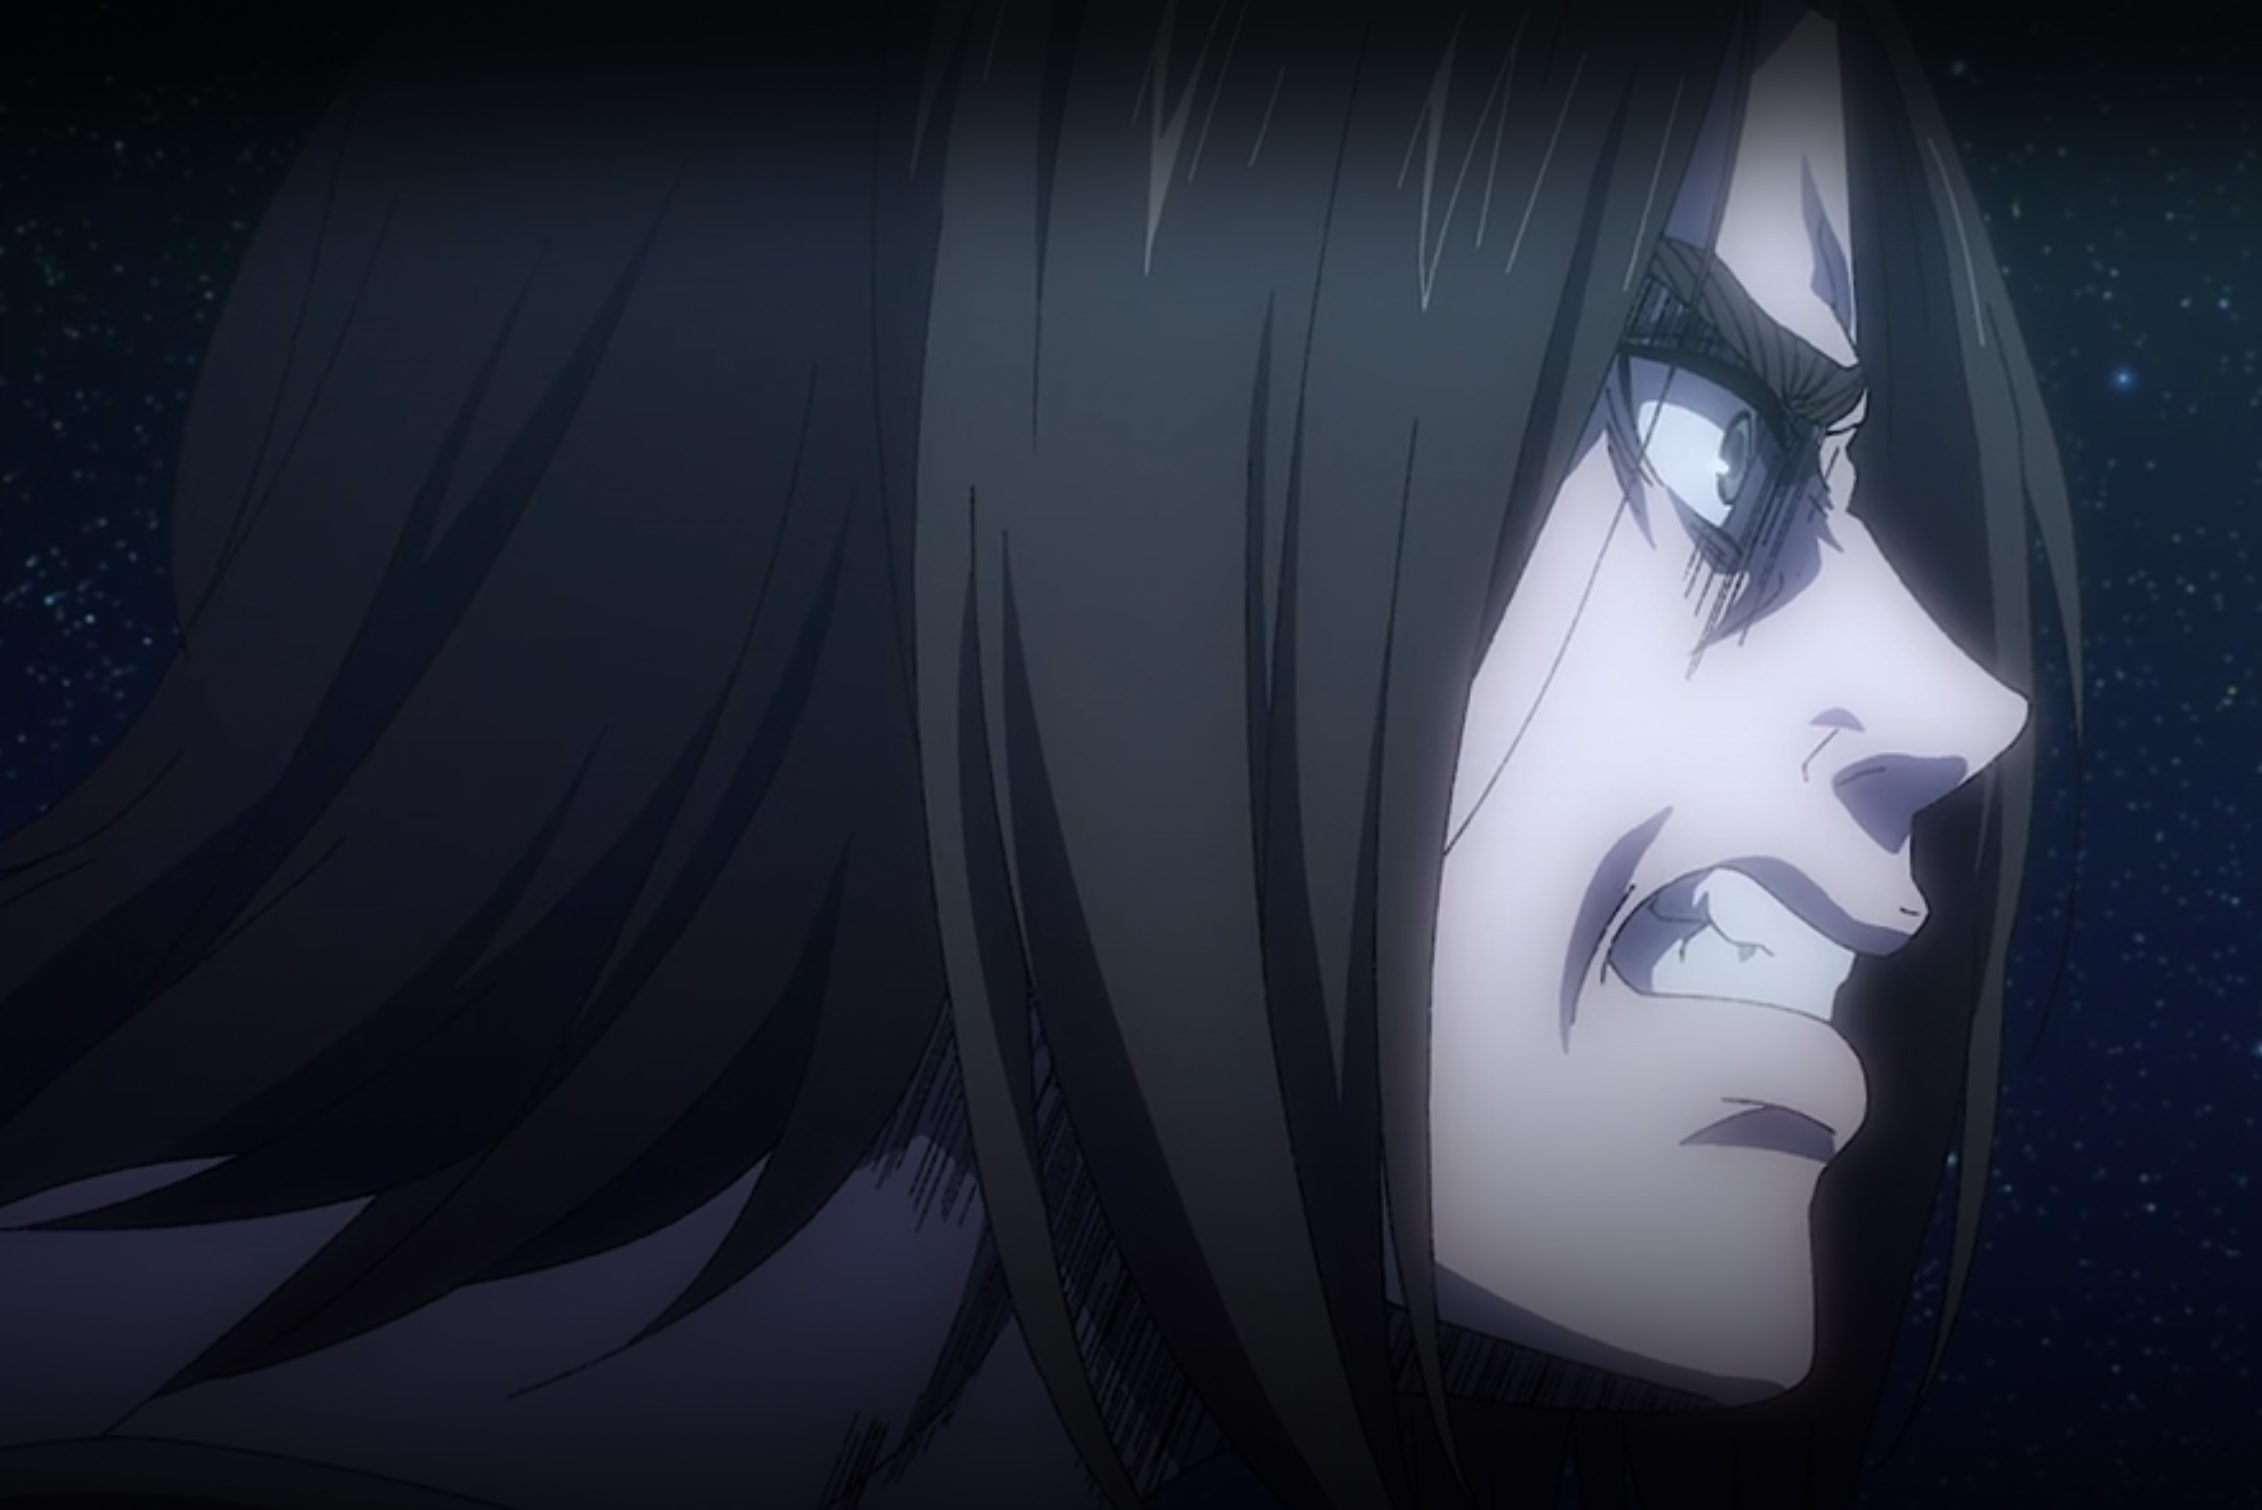 Attack On Titan Unleashes Hell On Earth In Bleak, Apocalyptic